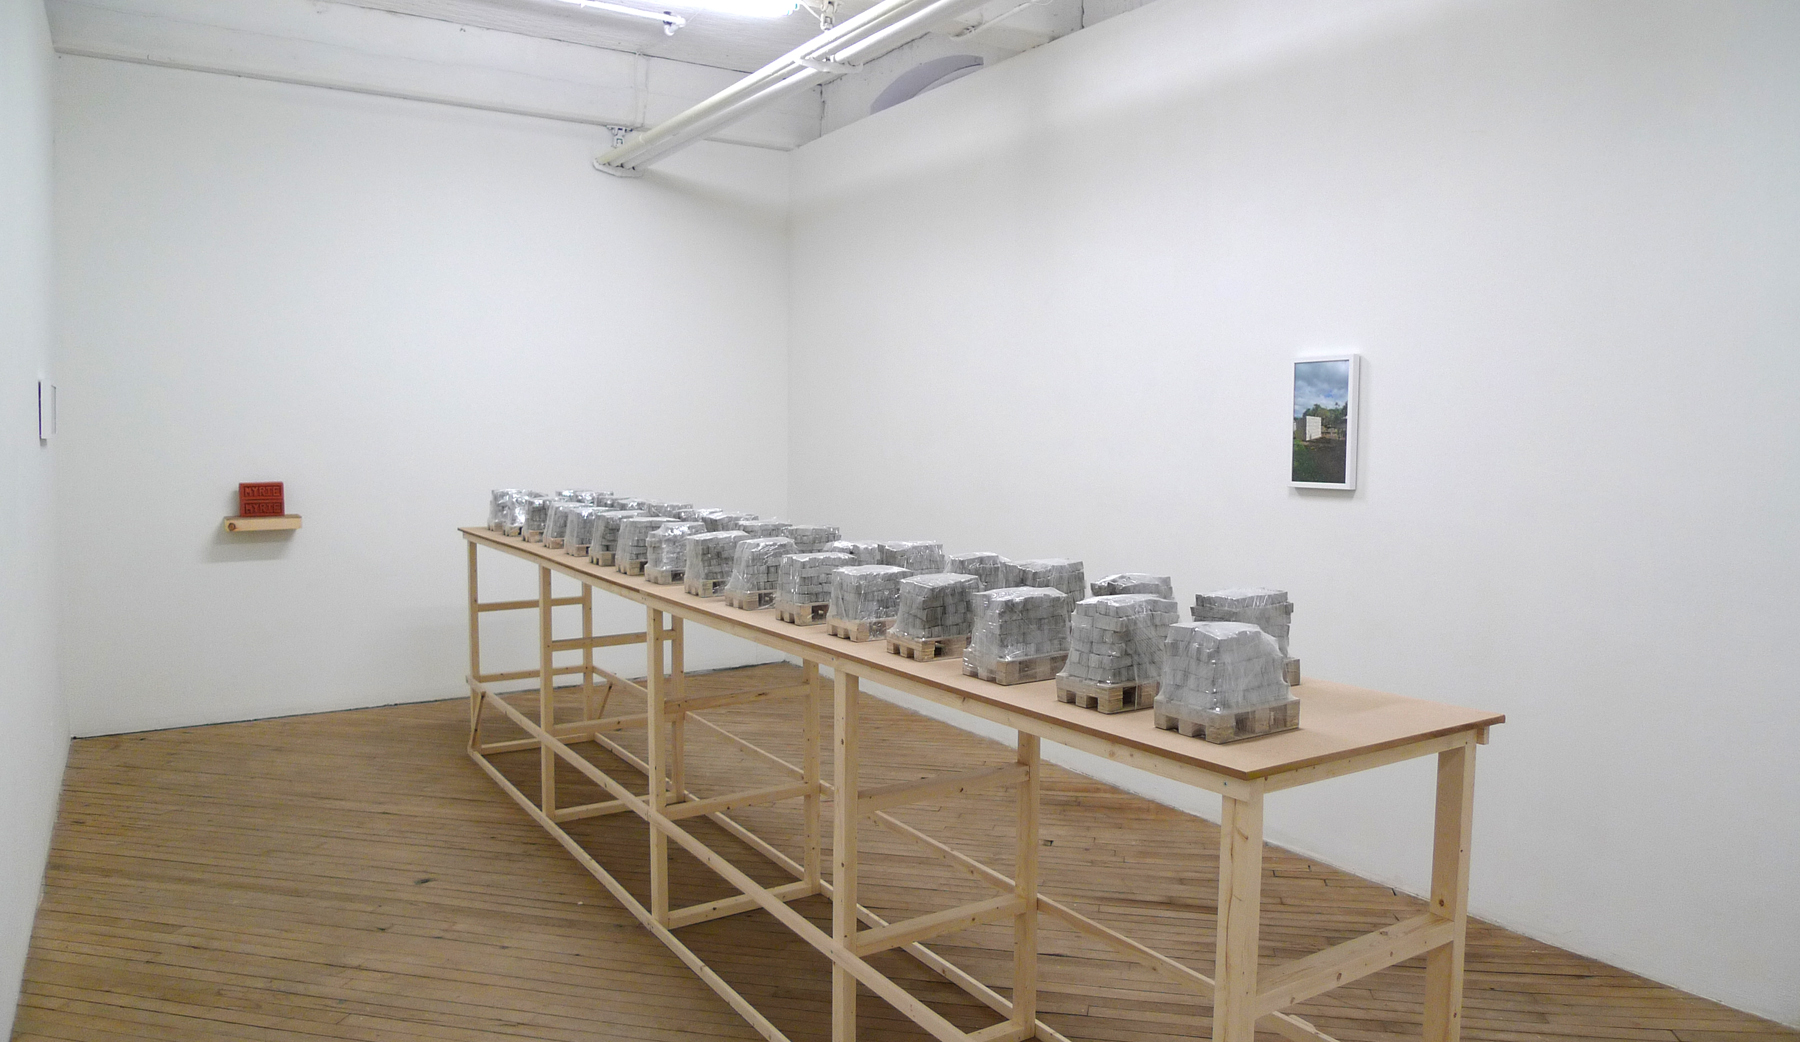 Vox Populi Gallery "Building a Wall Through My Father" install view